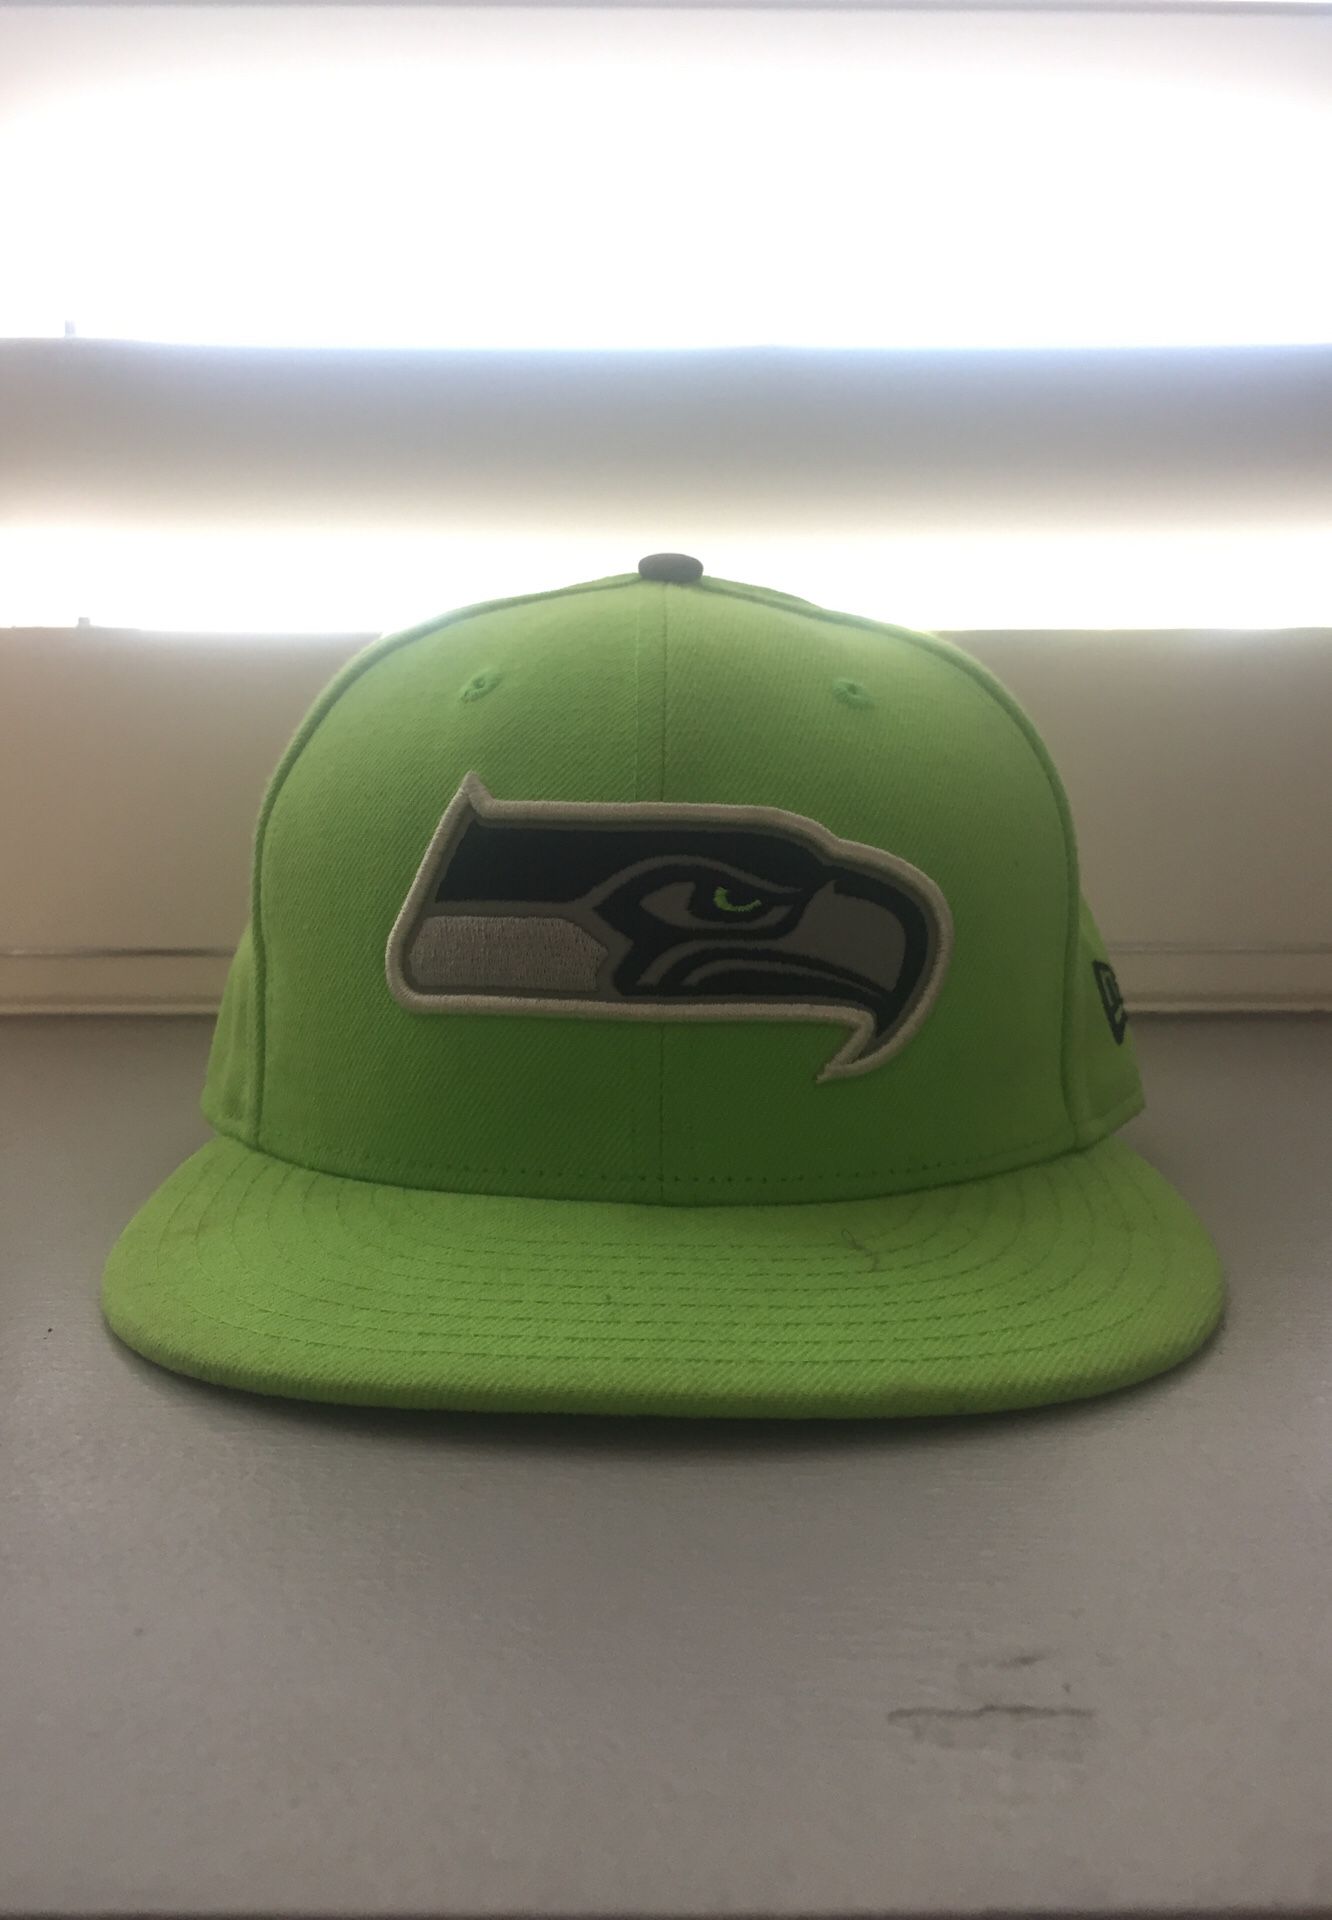 Seattle Seahawks Football Fitted Hat Size 7 1/8”